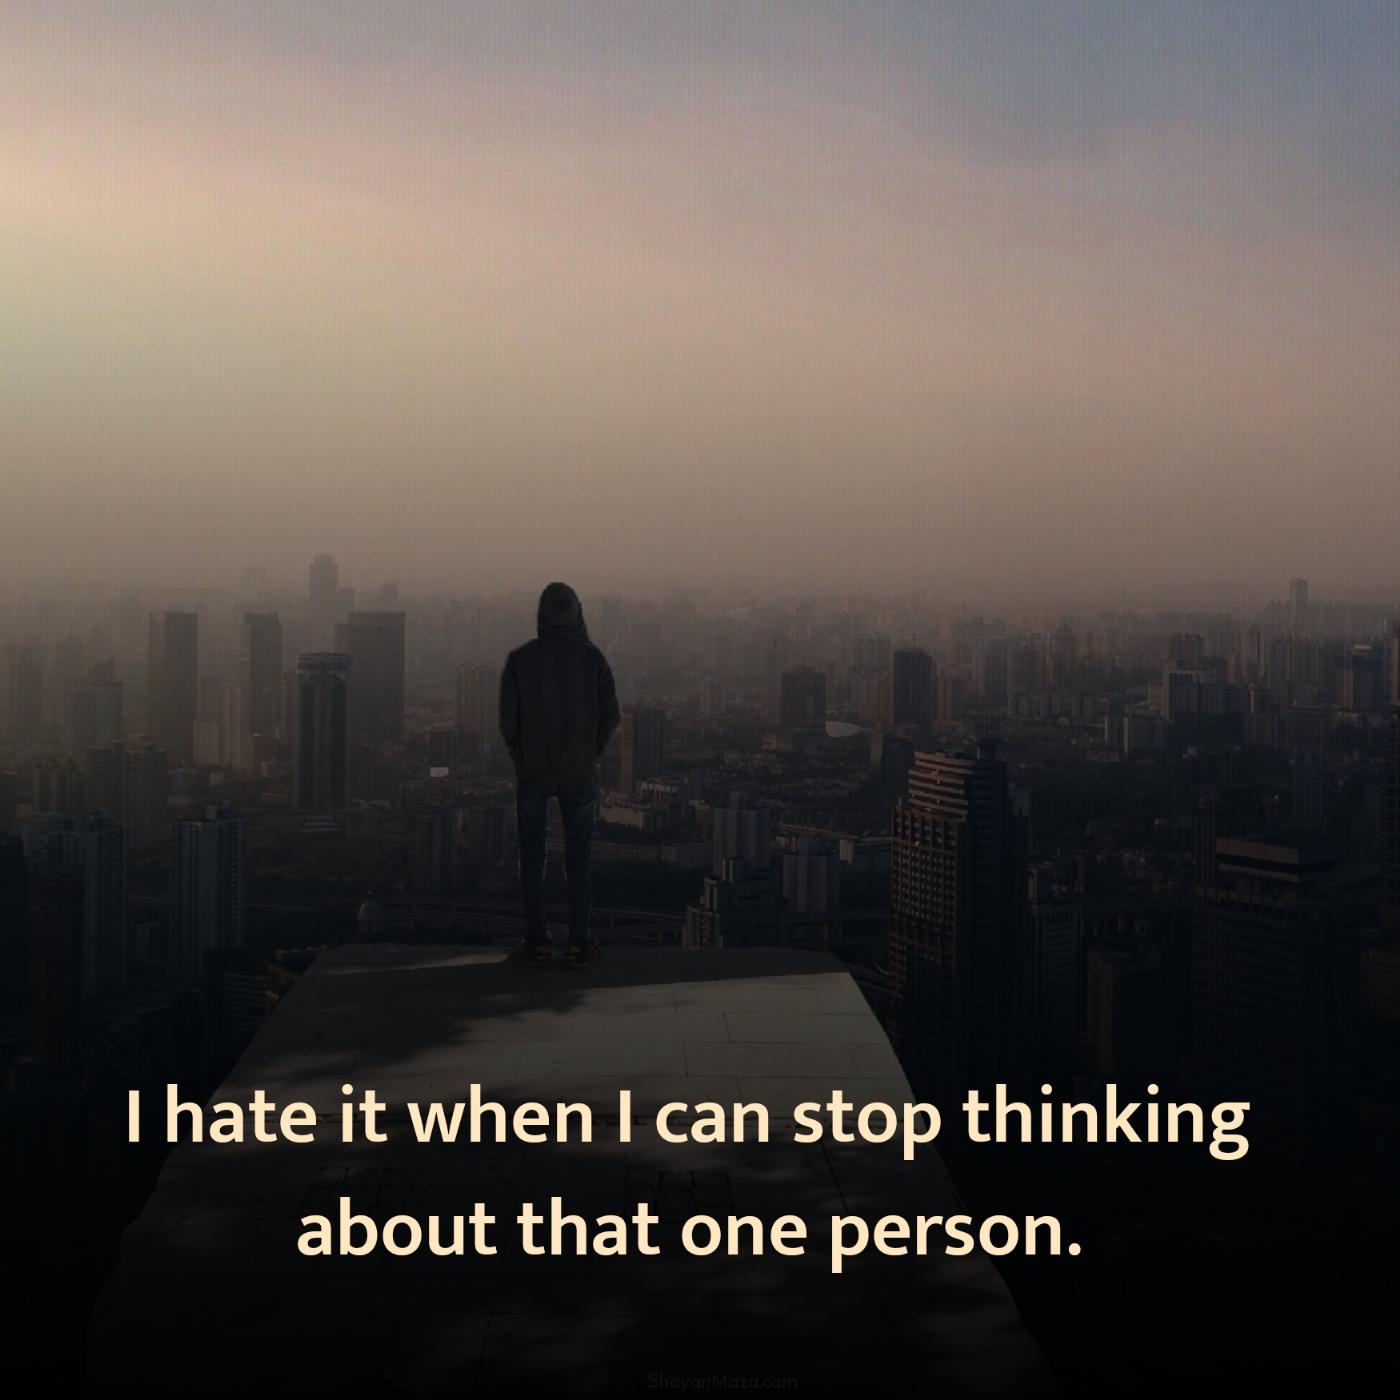 I hate it when I can stop thinking about that one person